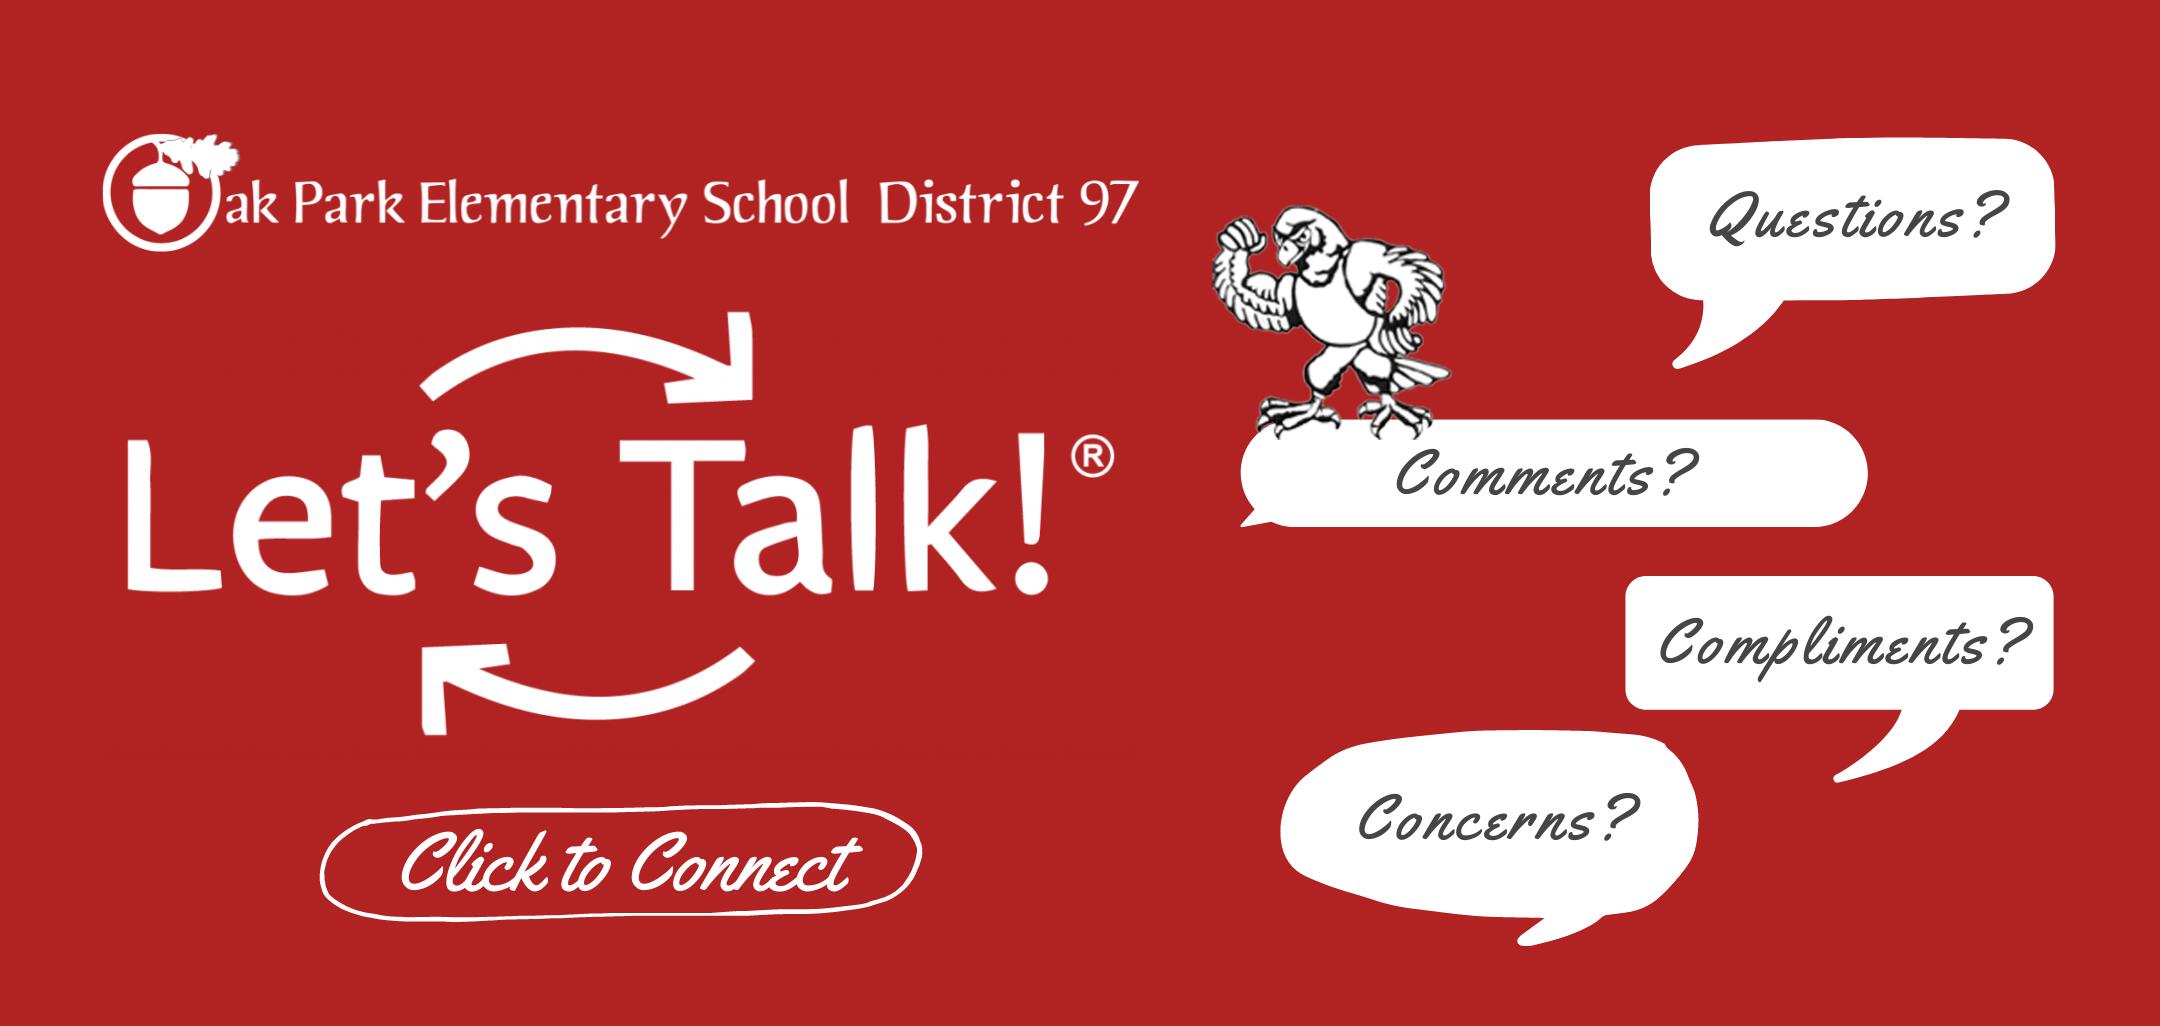 Click to share questions, concerns or compliments via Let's Talk!